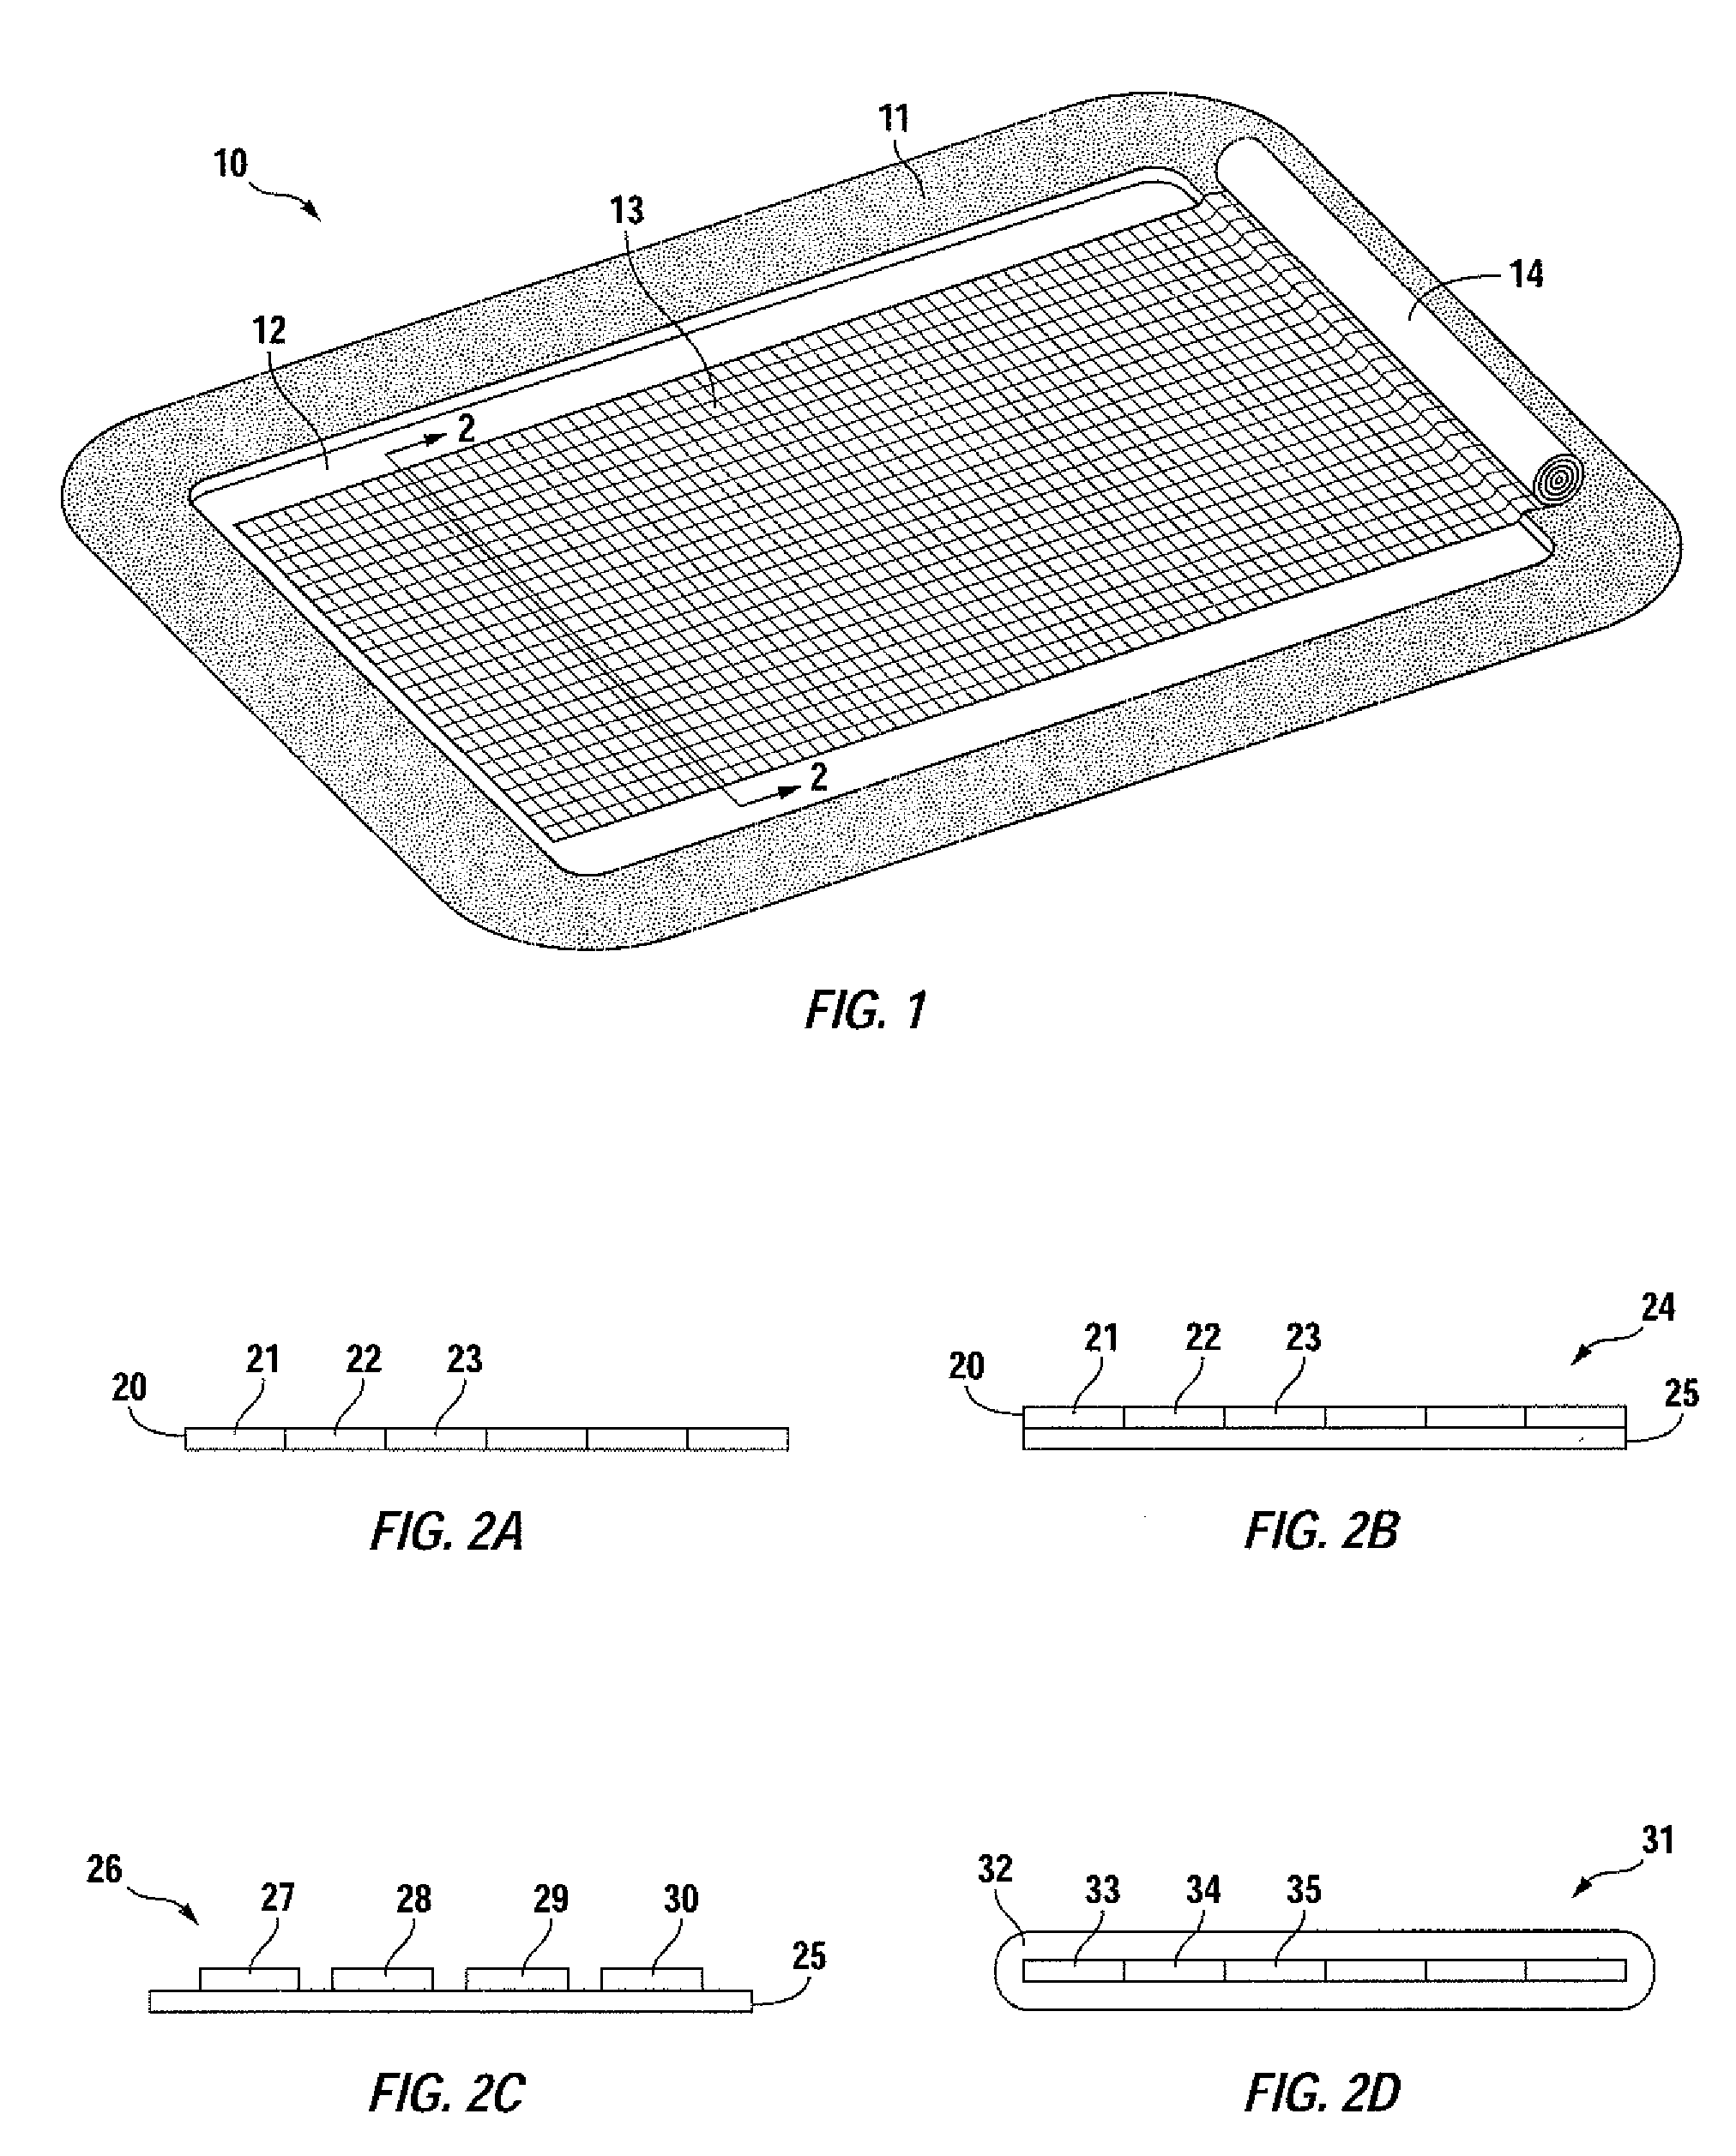 Photovoltaic electrical energy generating system